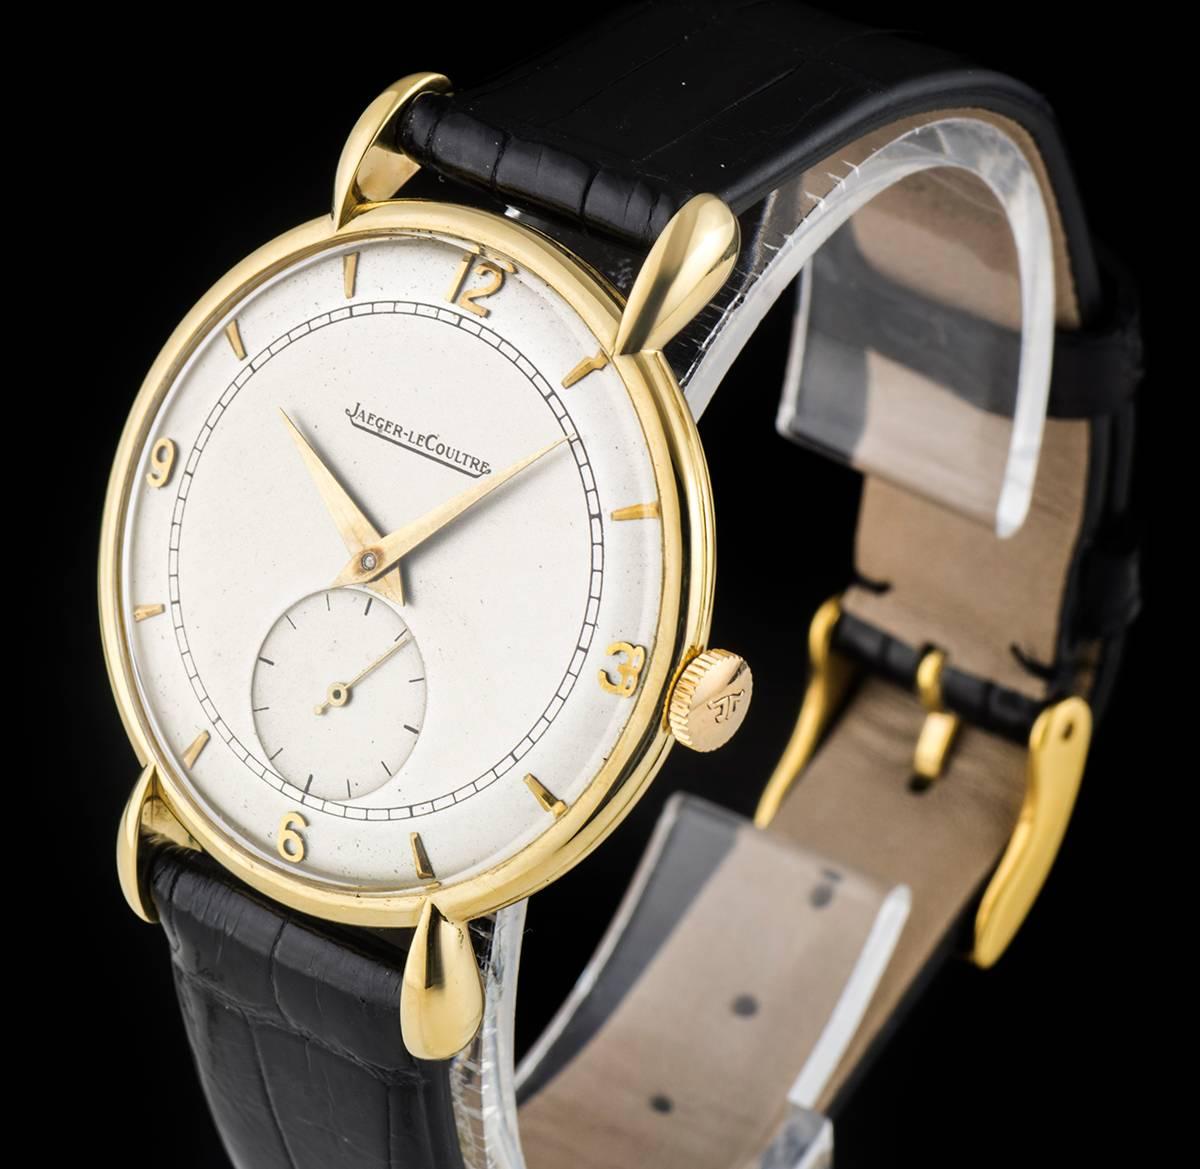 An 18k Yellow Gold Vintage Gents Dress Wristwatch, silver dial with applied hour markers and applied arabic numbers 3, 6, 9 and 12, small seconds at 6 0'clock, a fixed 18k yellow gold bezel, 18k yellow gold fancy lugs, a brand new black leather